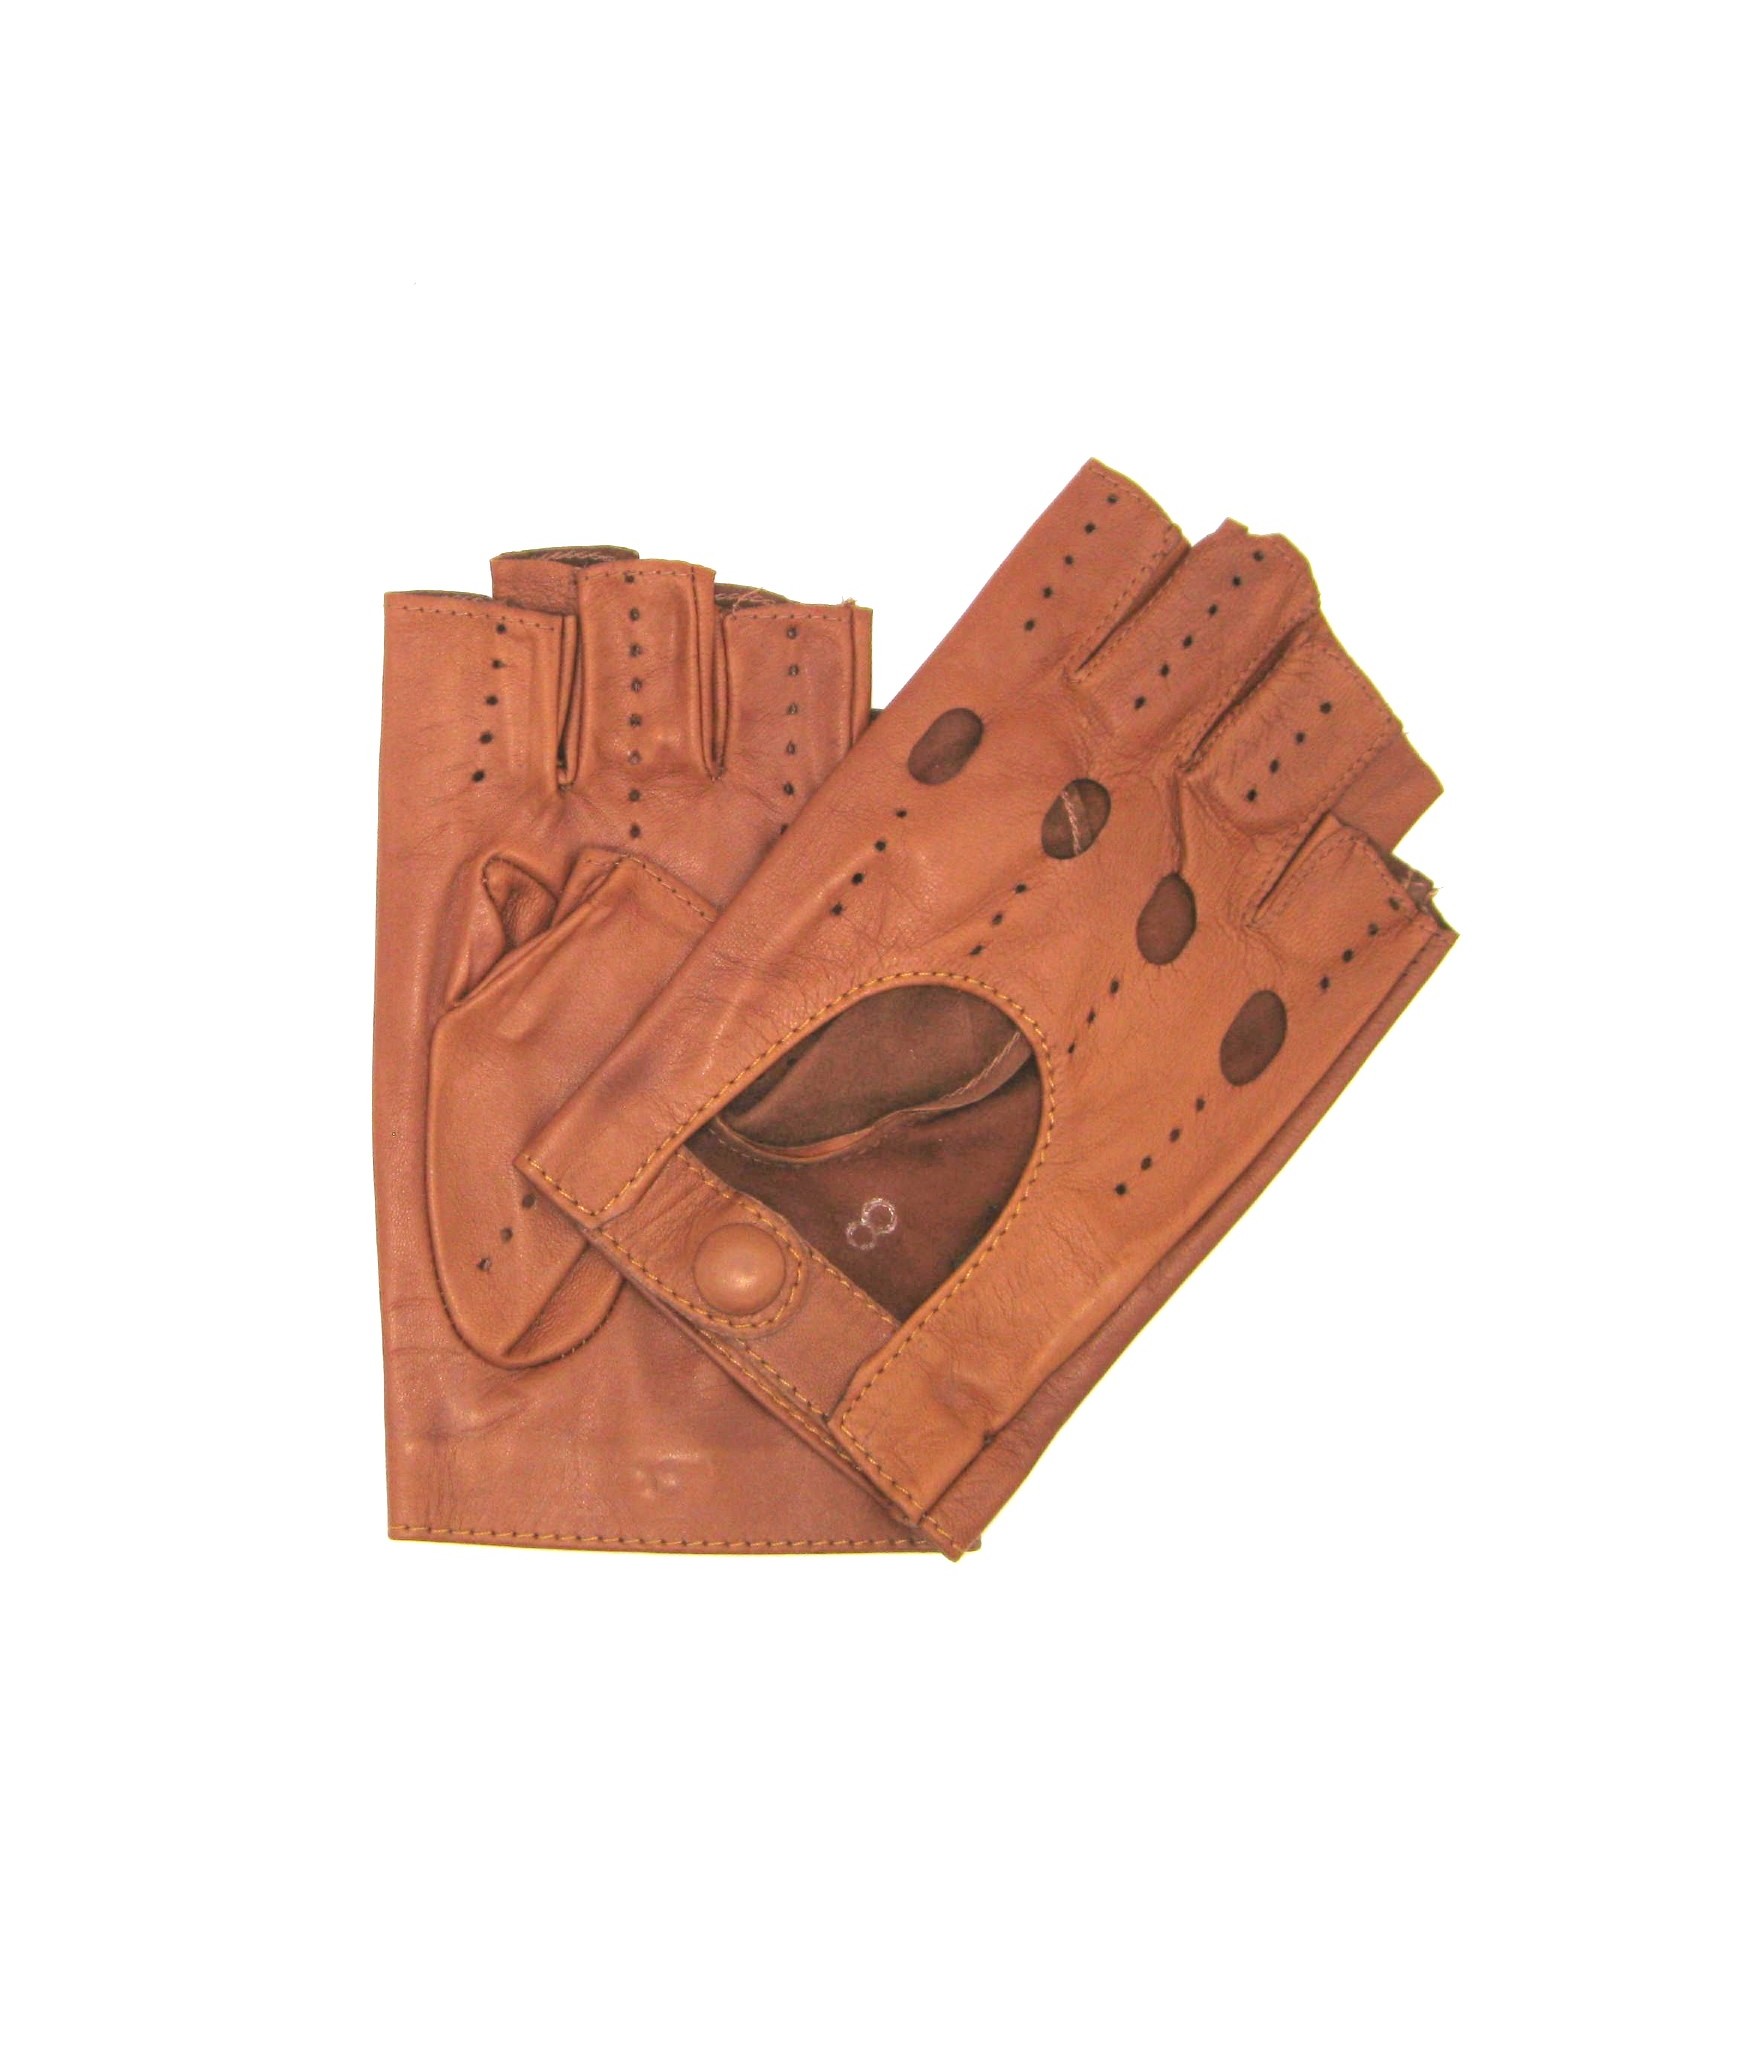 Driving gloves in Nappa leather fingerless   Tan